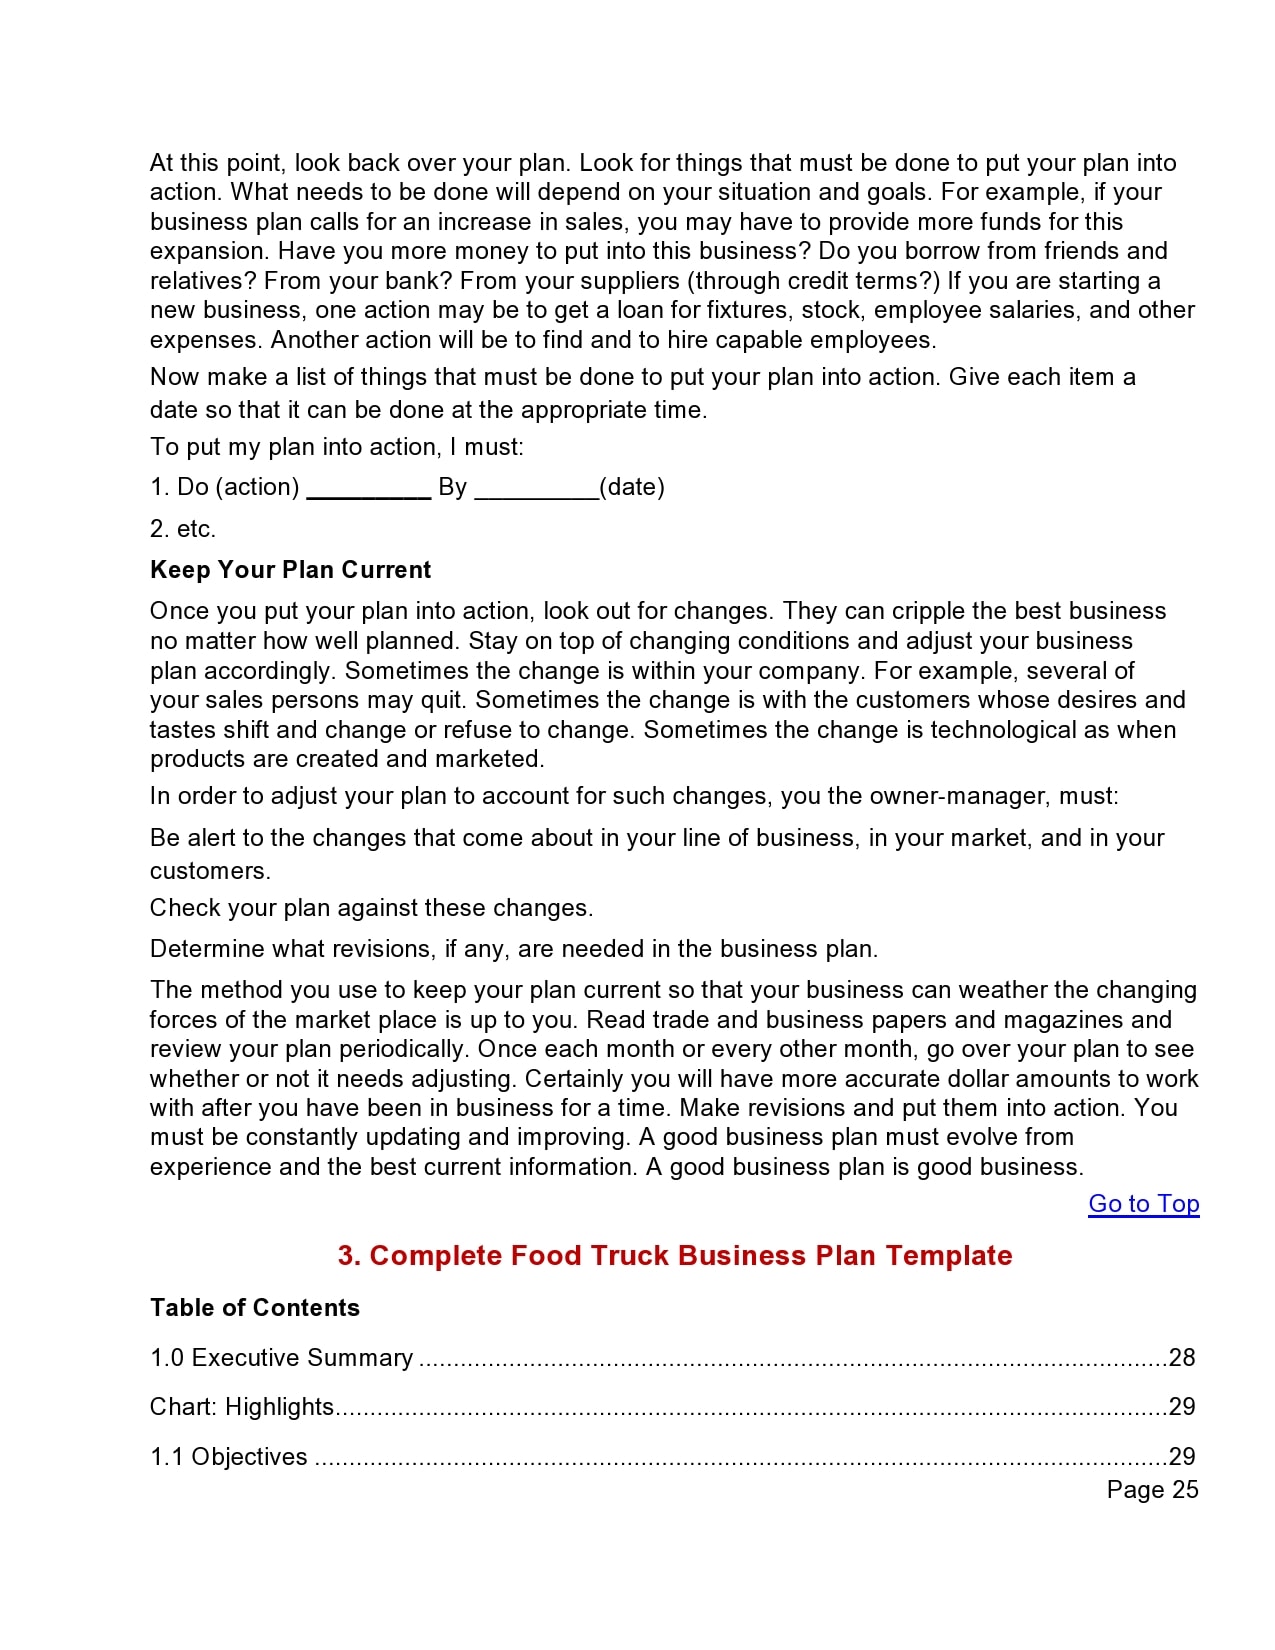 22 Proven Food Truck Business Plans (PDF, Word) - TemplateArchive Within Business Plan Template Food Truck